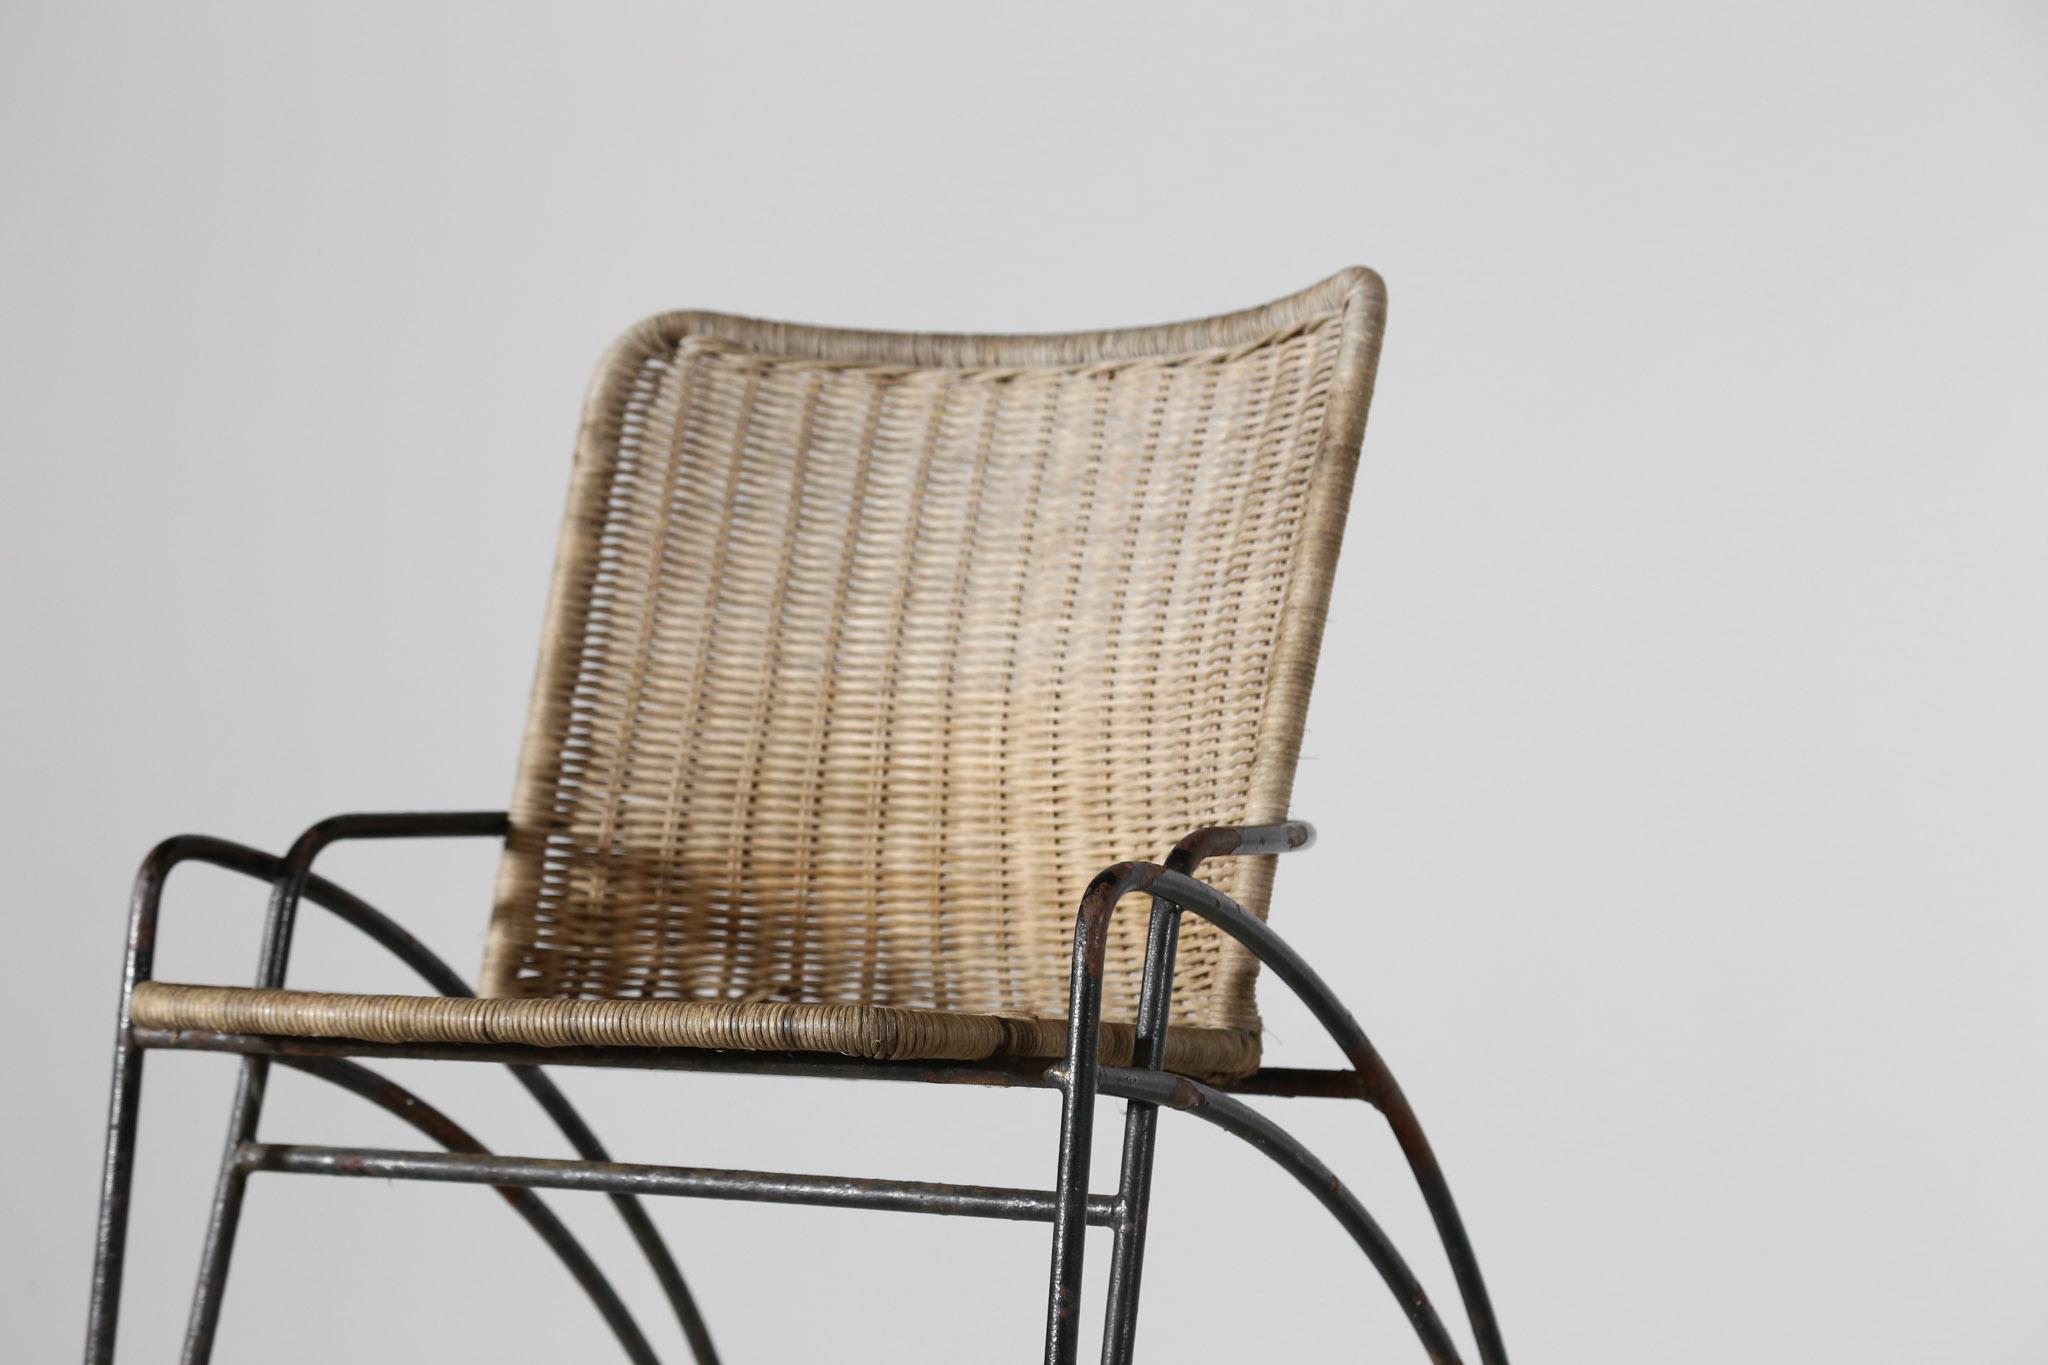 Really nice chair in the style of Raoul Guys, from 1950s.
Made of original wicker and metal.